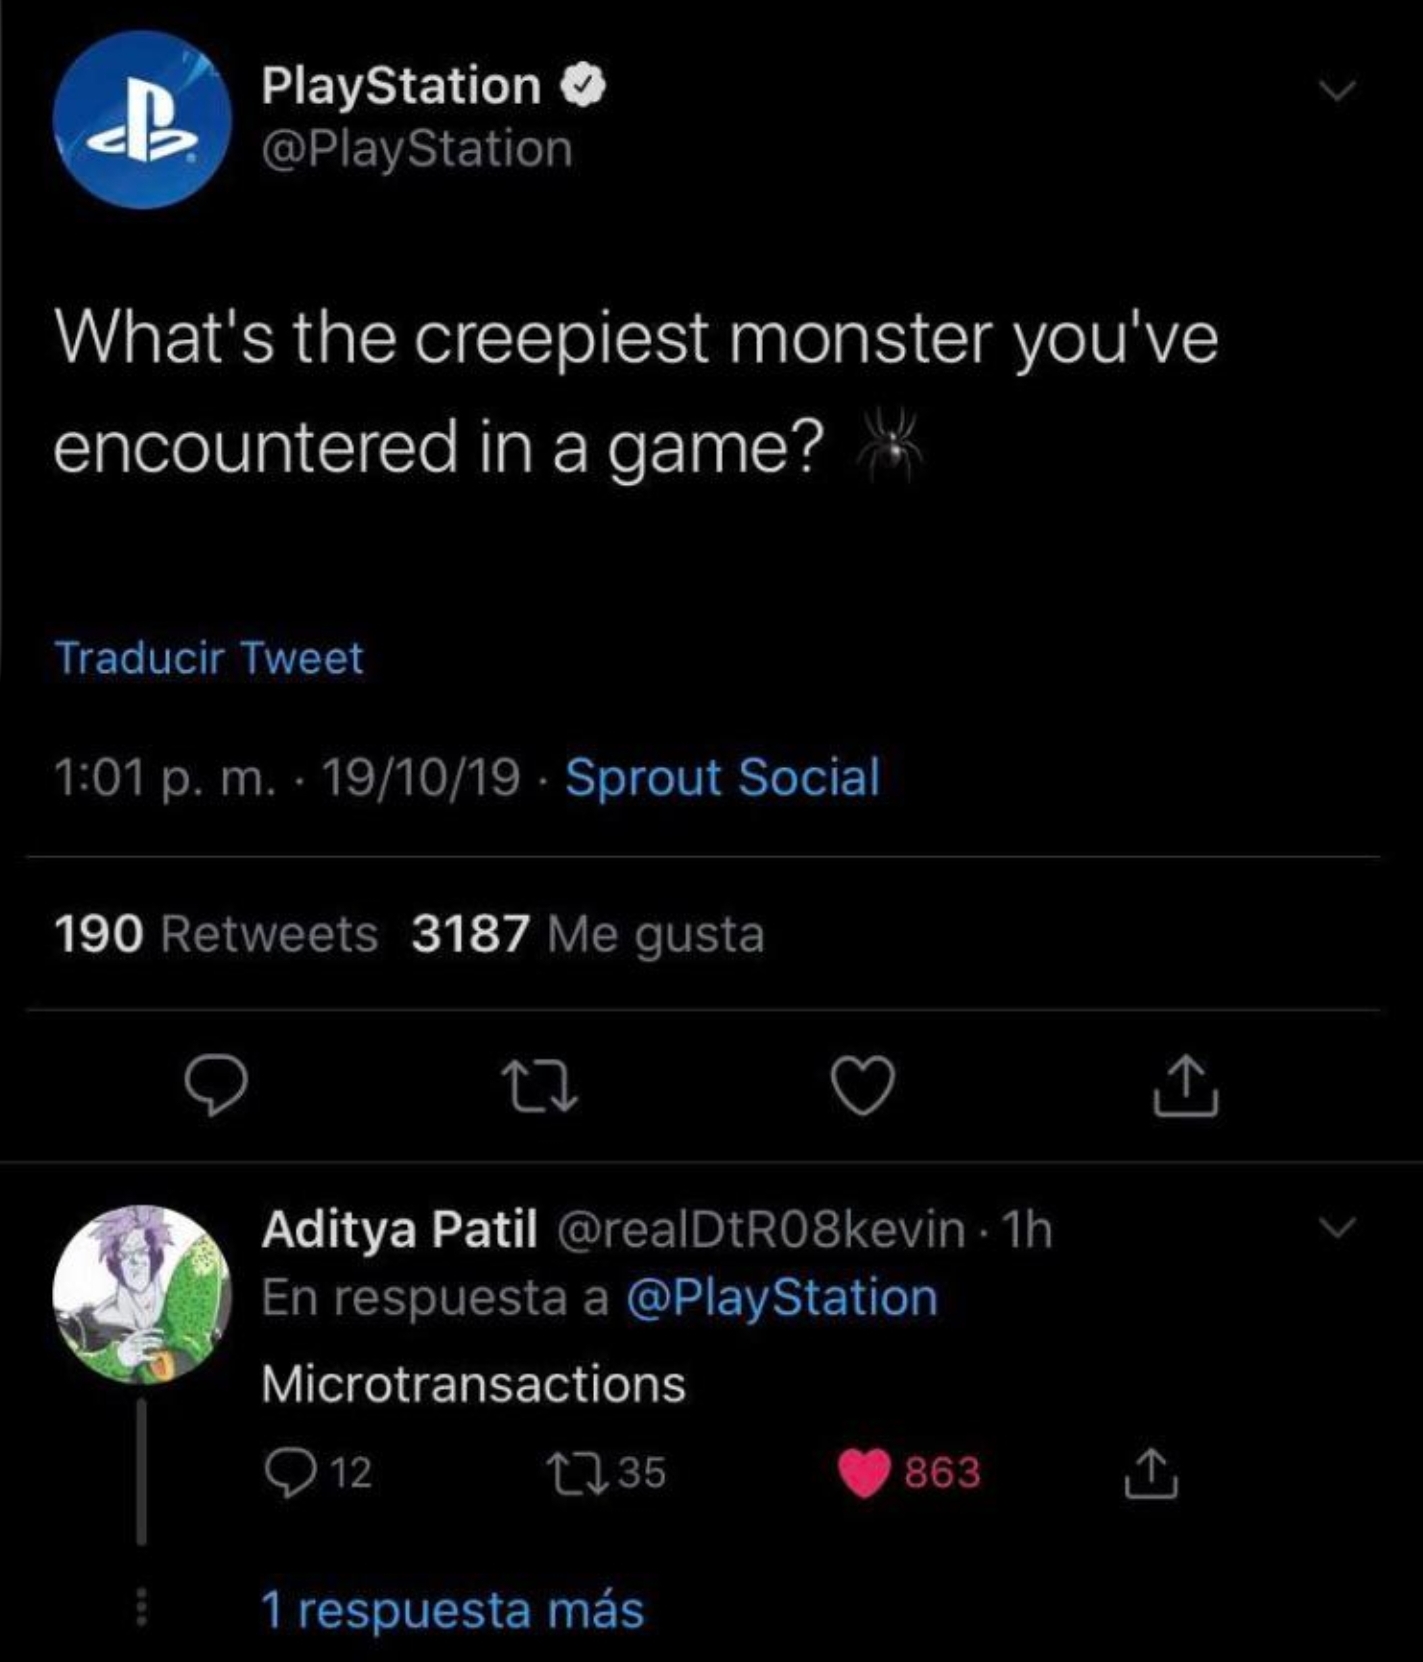 PlayStation What's the creepiest monster you've encountered in a game? Traducir Tweet p. m. 191019. Sprout Social 190 3187 Me gusta Aditya Patil . 1h En respuesta a Microtransactions 12 1235 863 805 1 respuesta ms